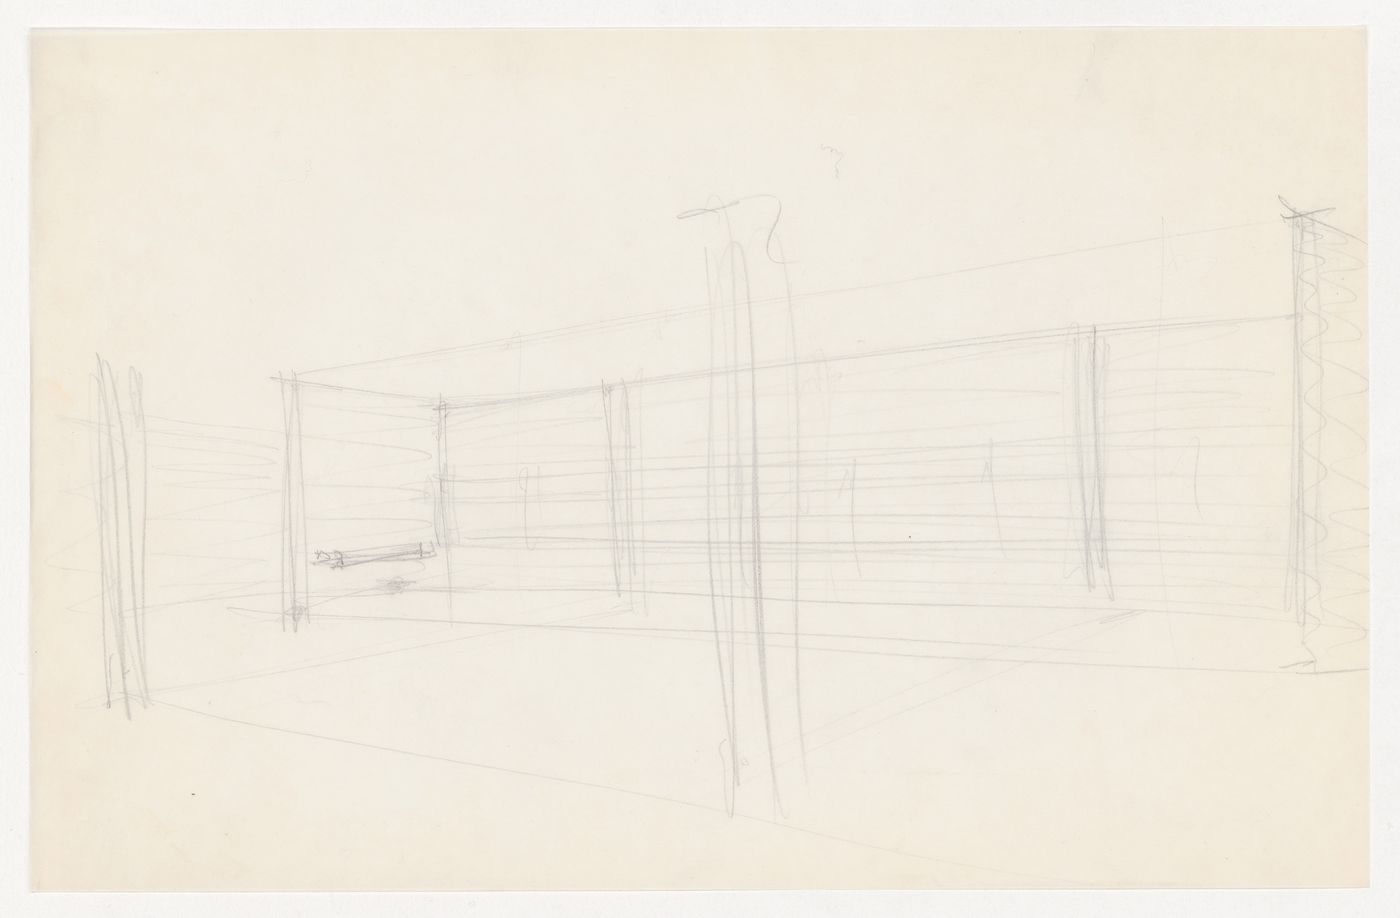 Interior perspective sketch for the Metallurgy Building, Illinois Institute of Technology, Chicago